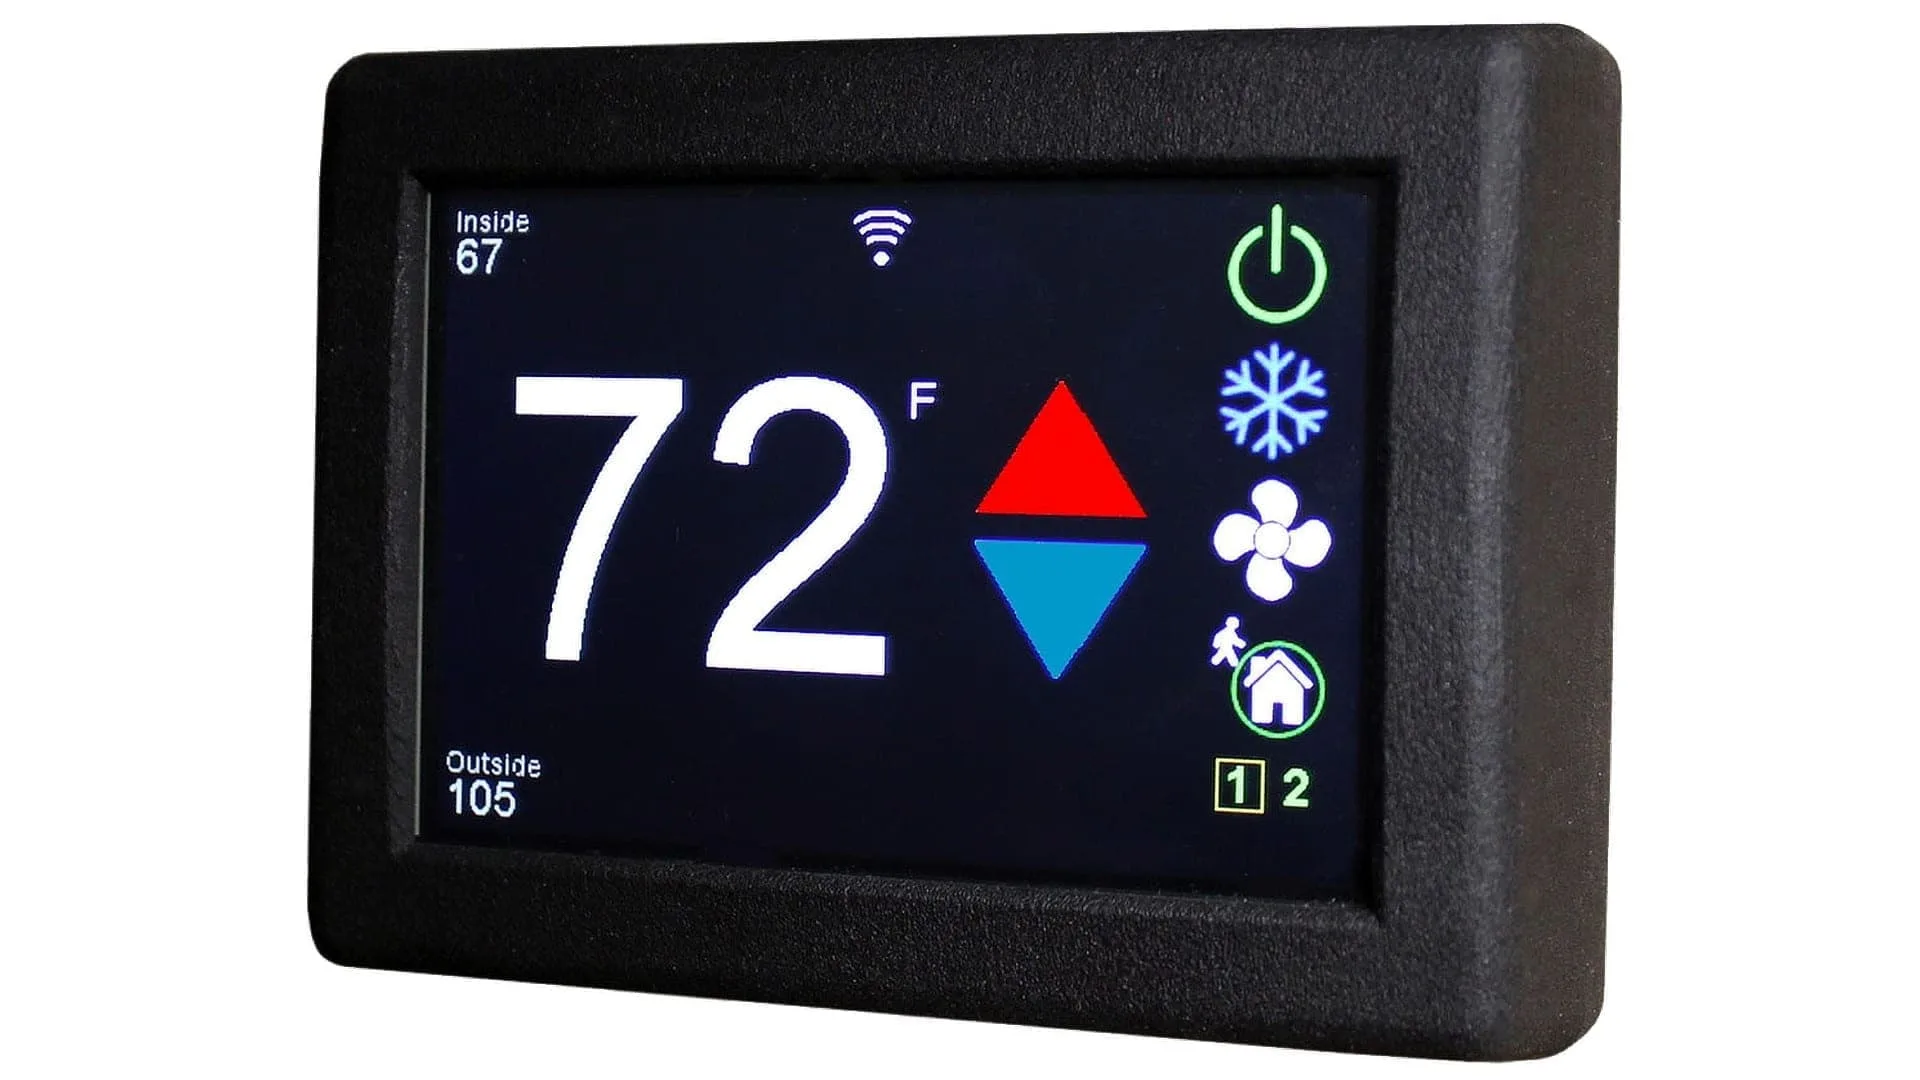 The Micro-Air EasyTouch RV Thermostat